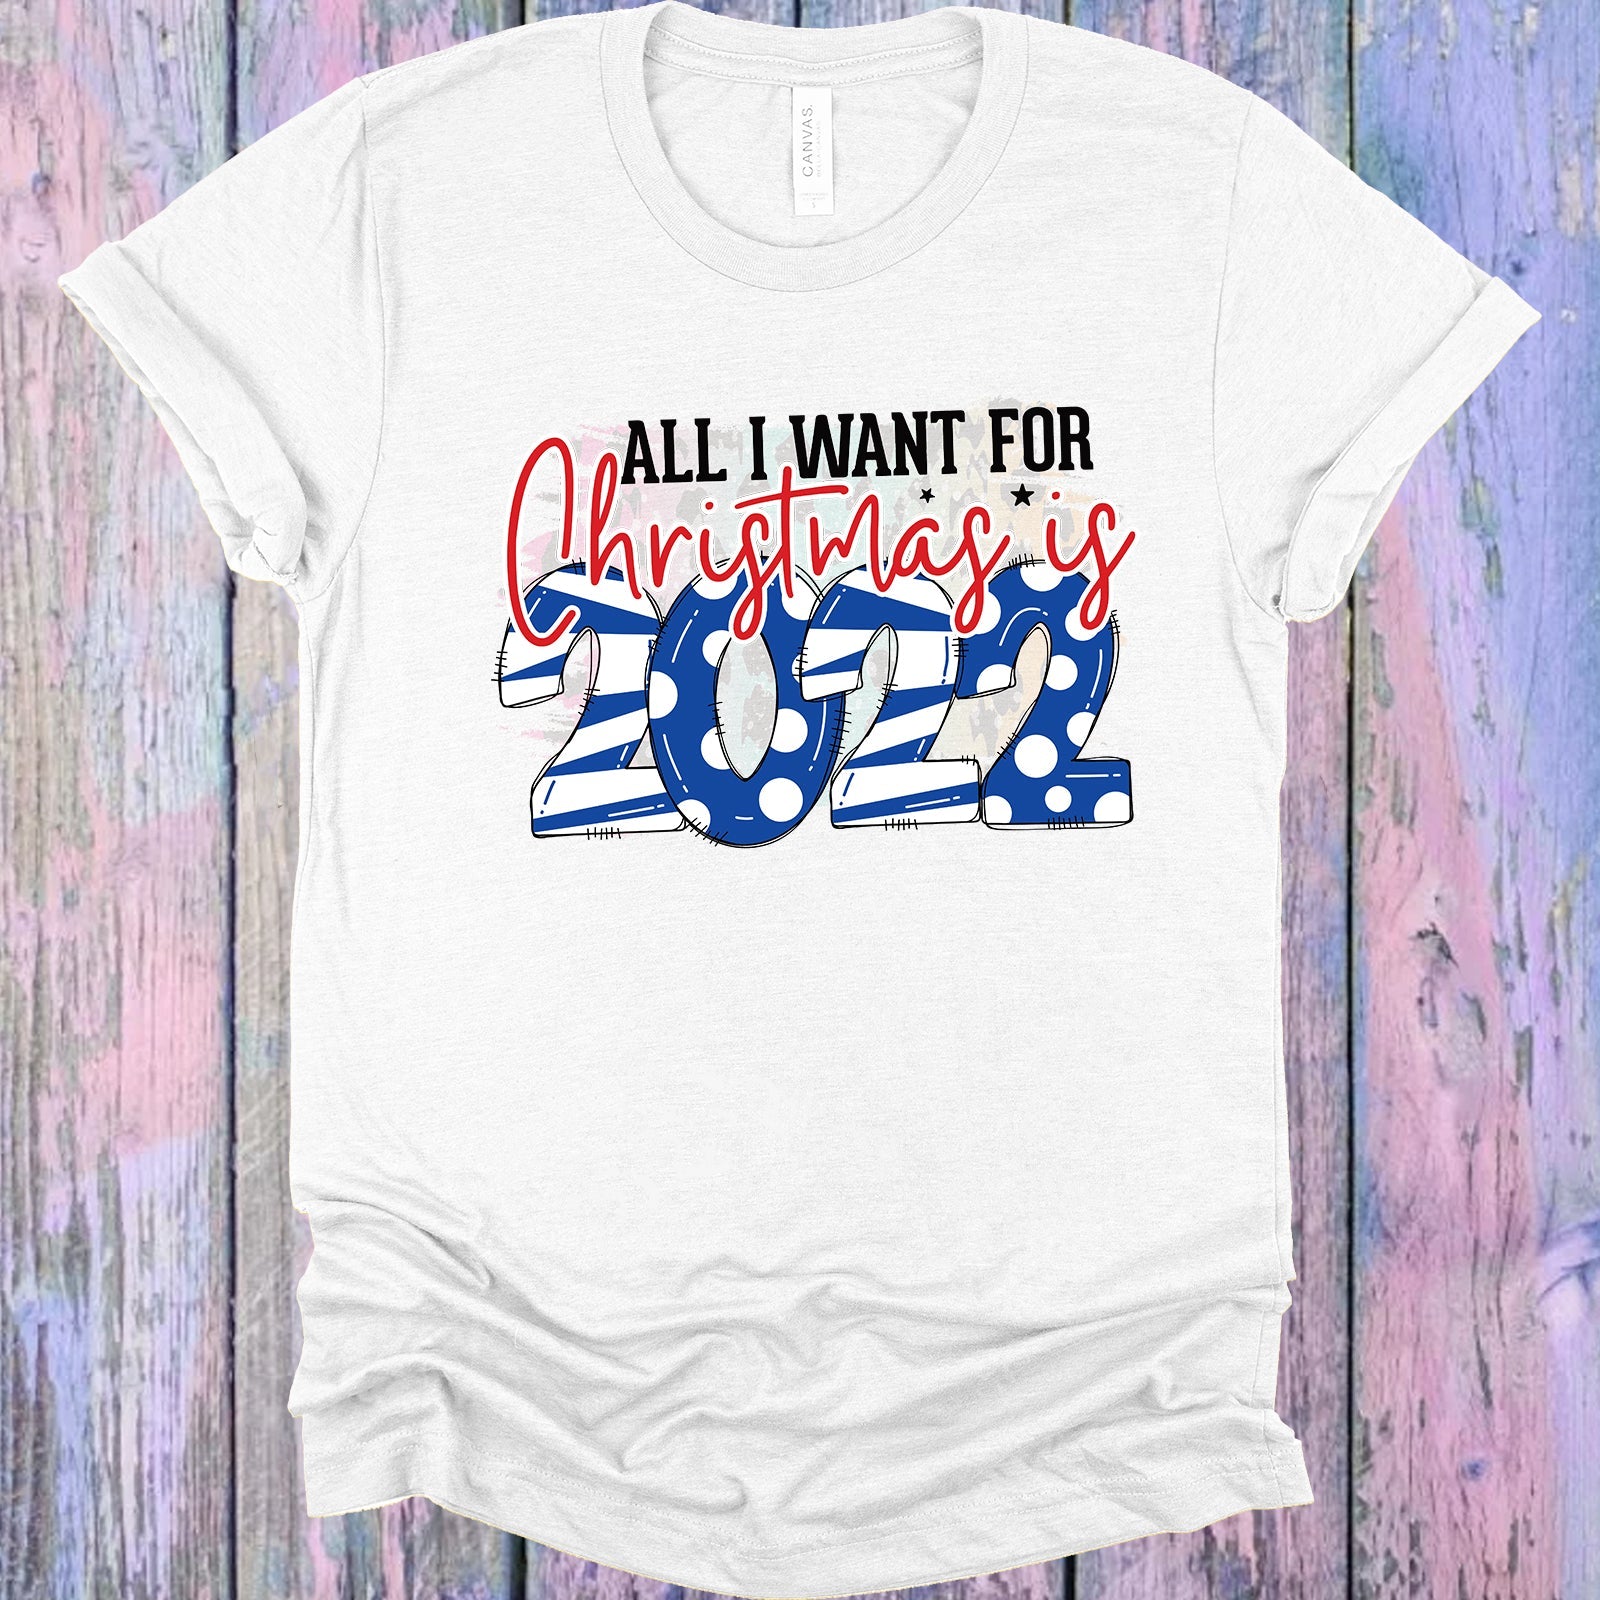 All I Want For Christmas Is 2022 Graphic Tee Graphic Tee